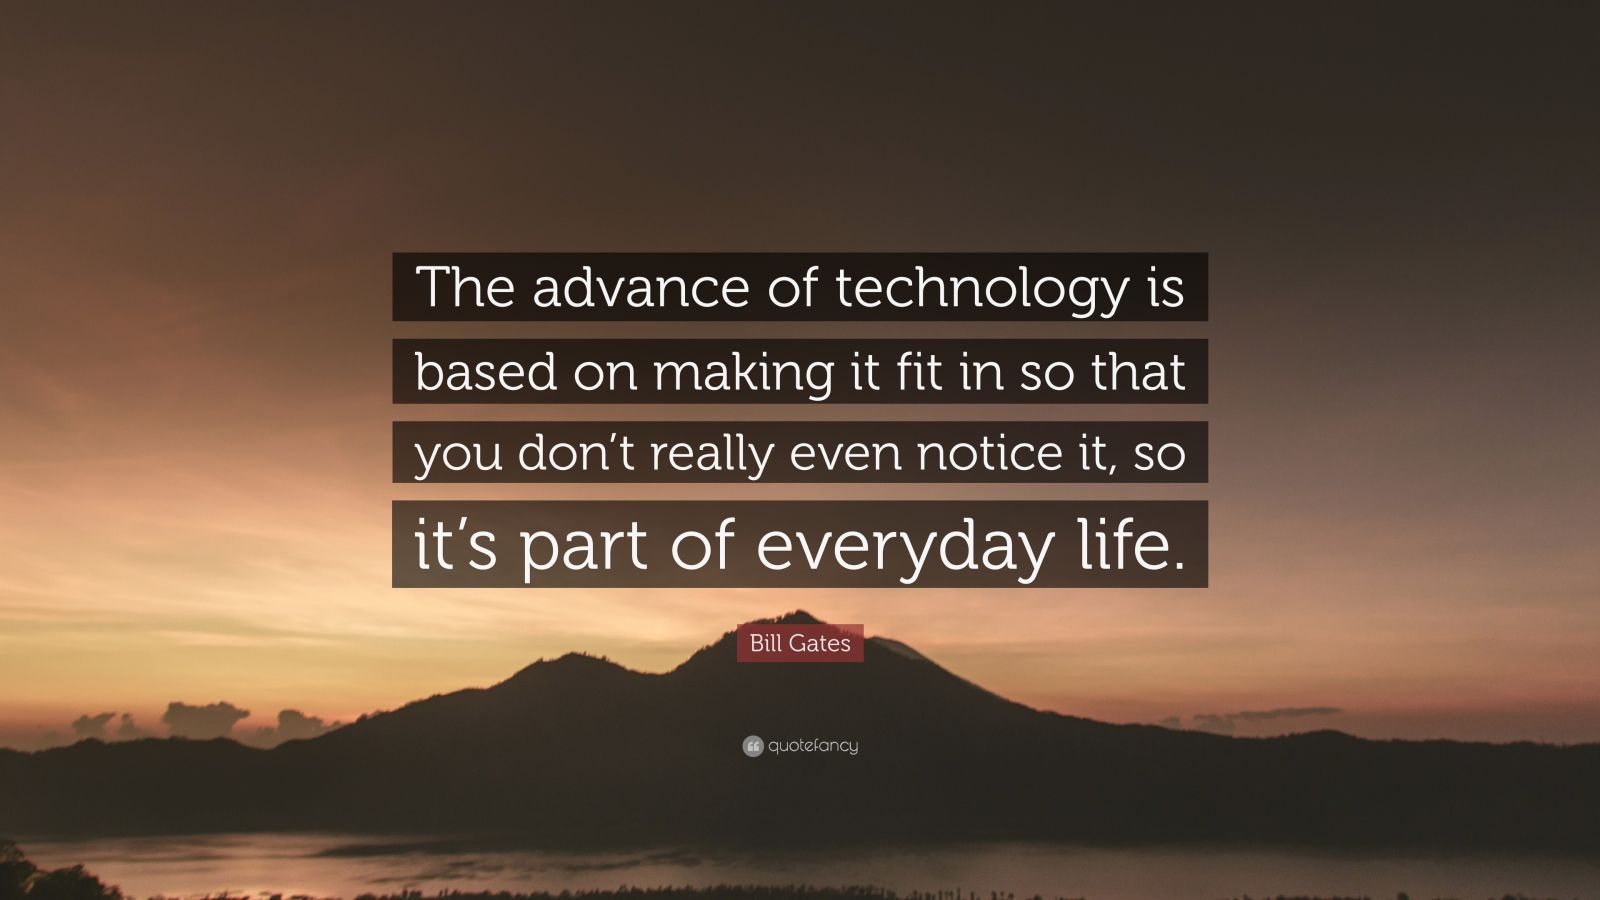 Bill Gates Quote: “The advance of technology is based on making it fit ...